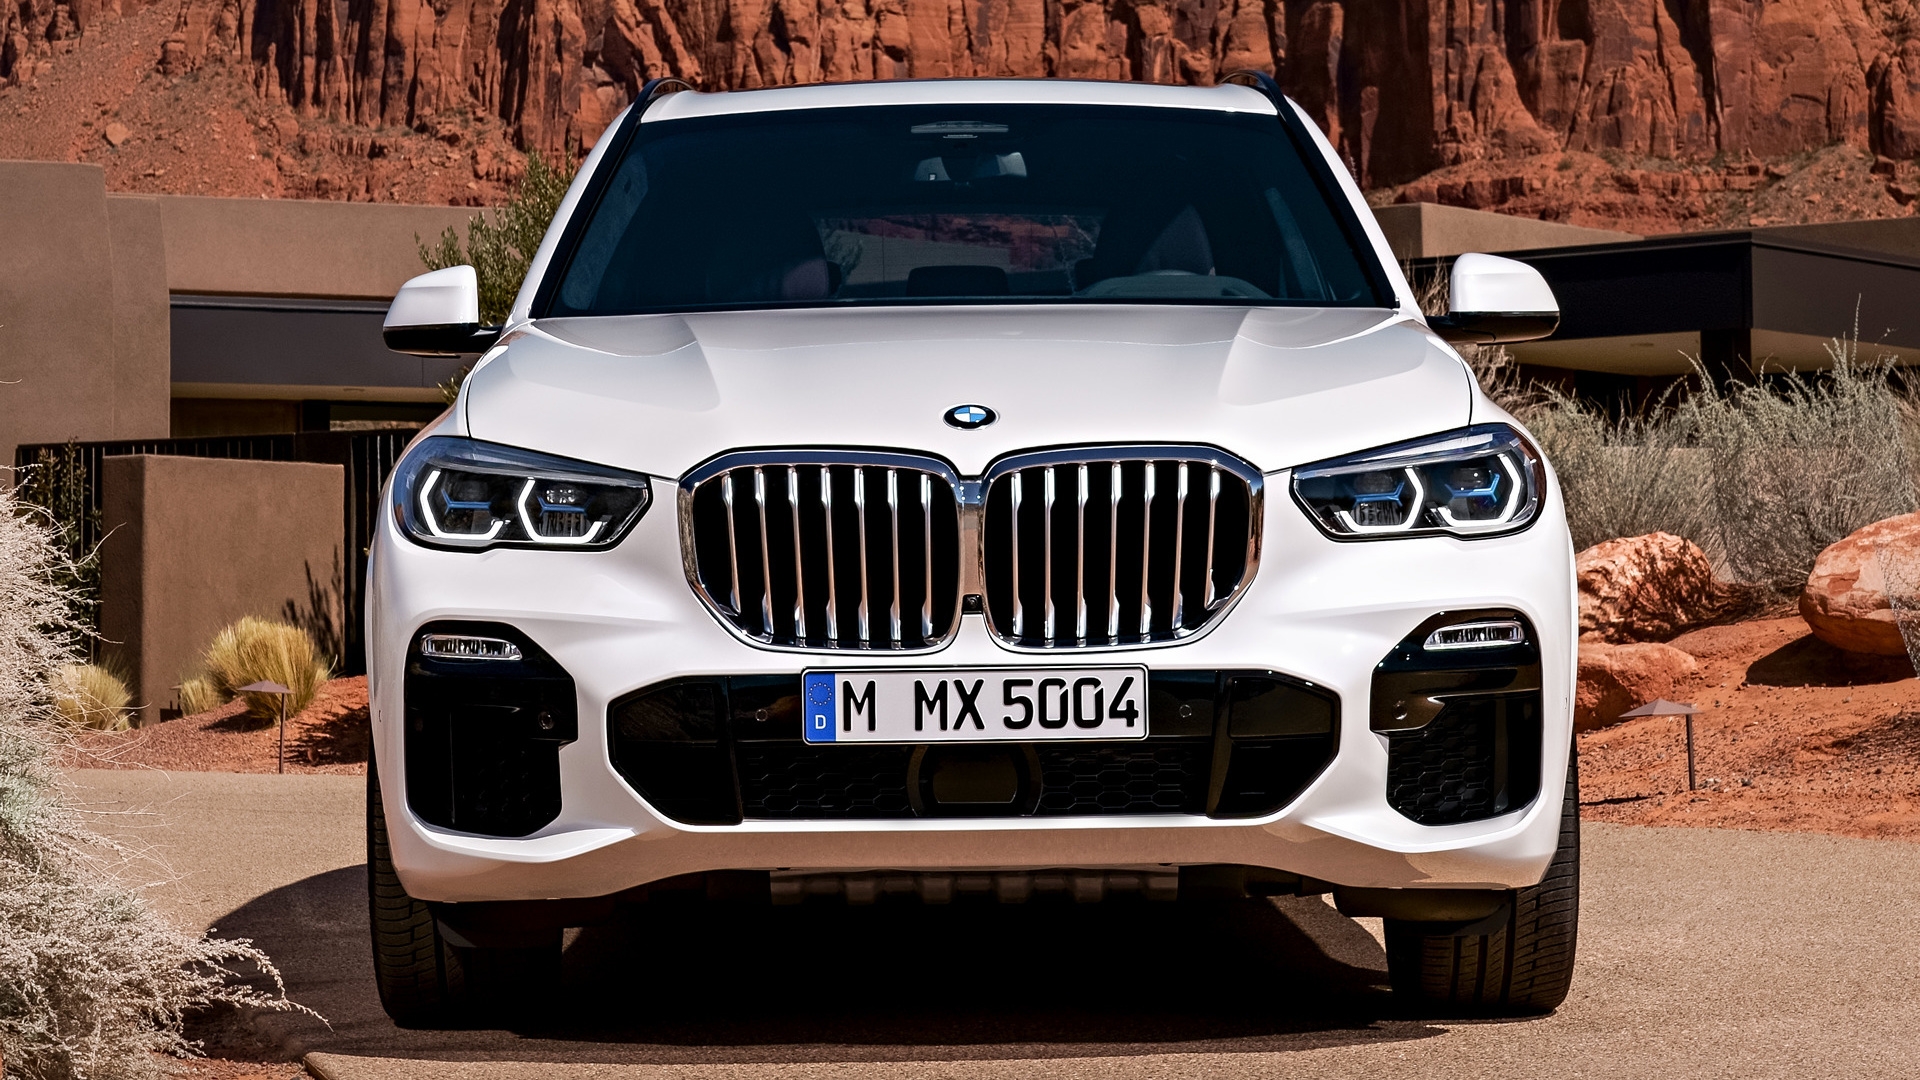 Wallpapers white front view bmw x5 on the desktop